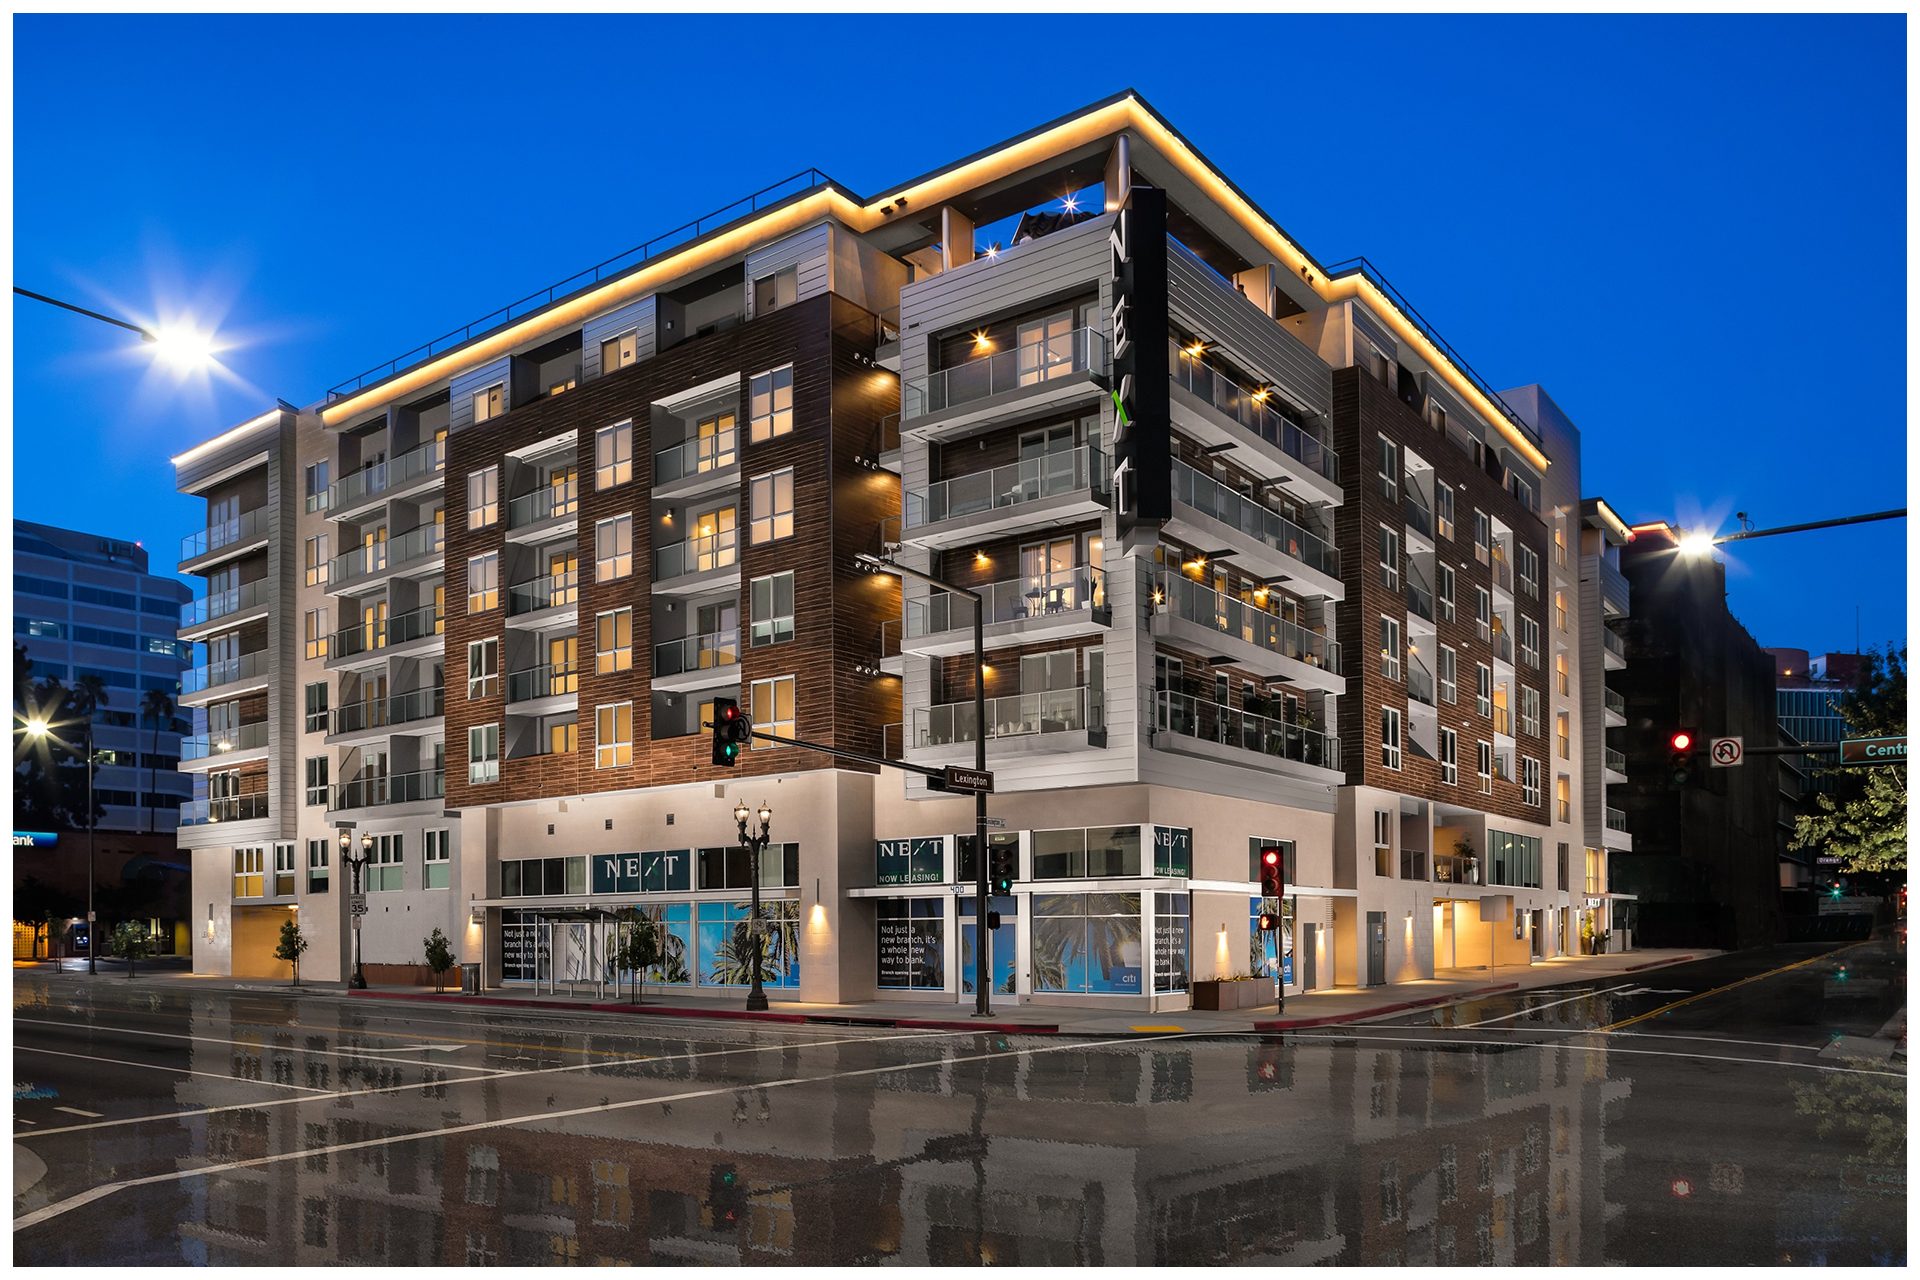 NEXT ON LEX - GLENDALE499 Residential Units & 8140 SF of retail space. Media Systems provided:Common Area WiFiCommon Area AV3x3 Video Wall DisplayApartment Audio System in all Penthouse units